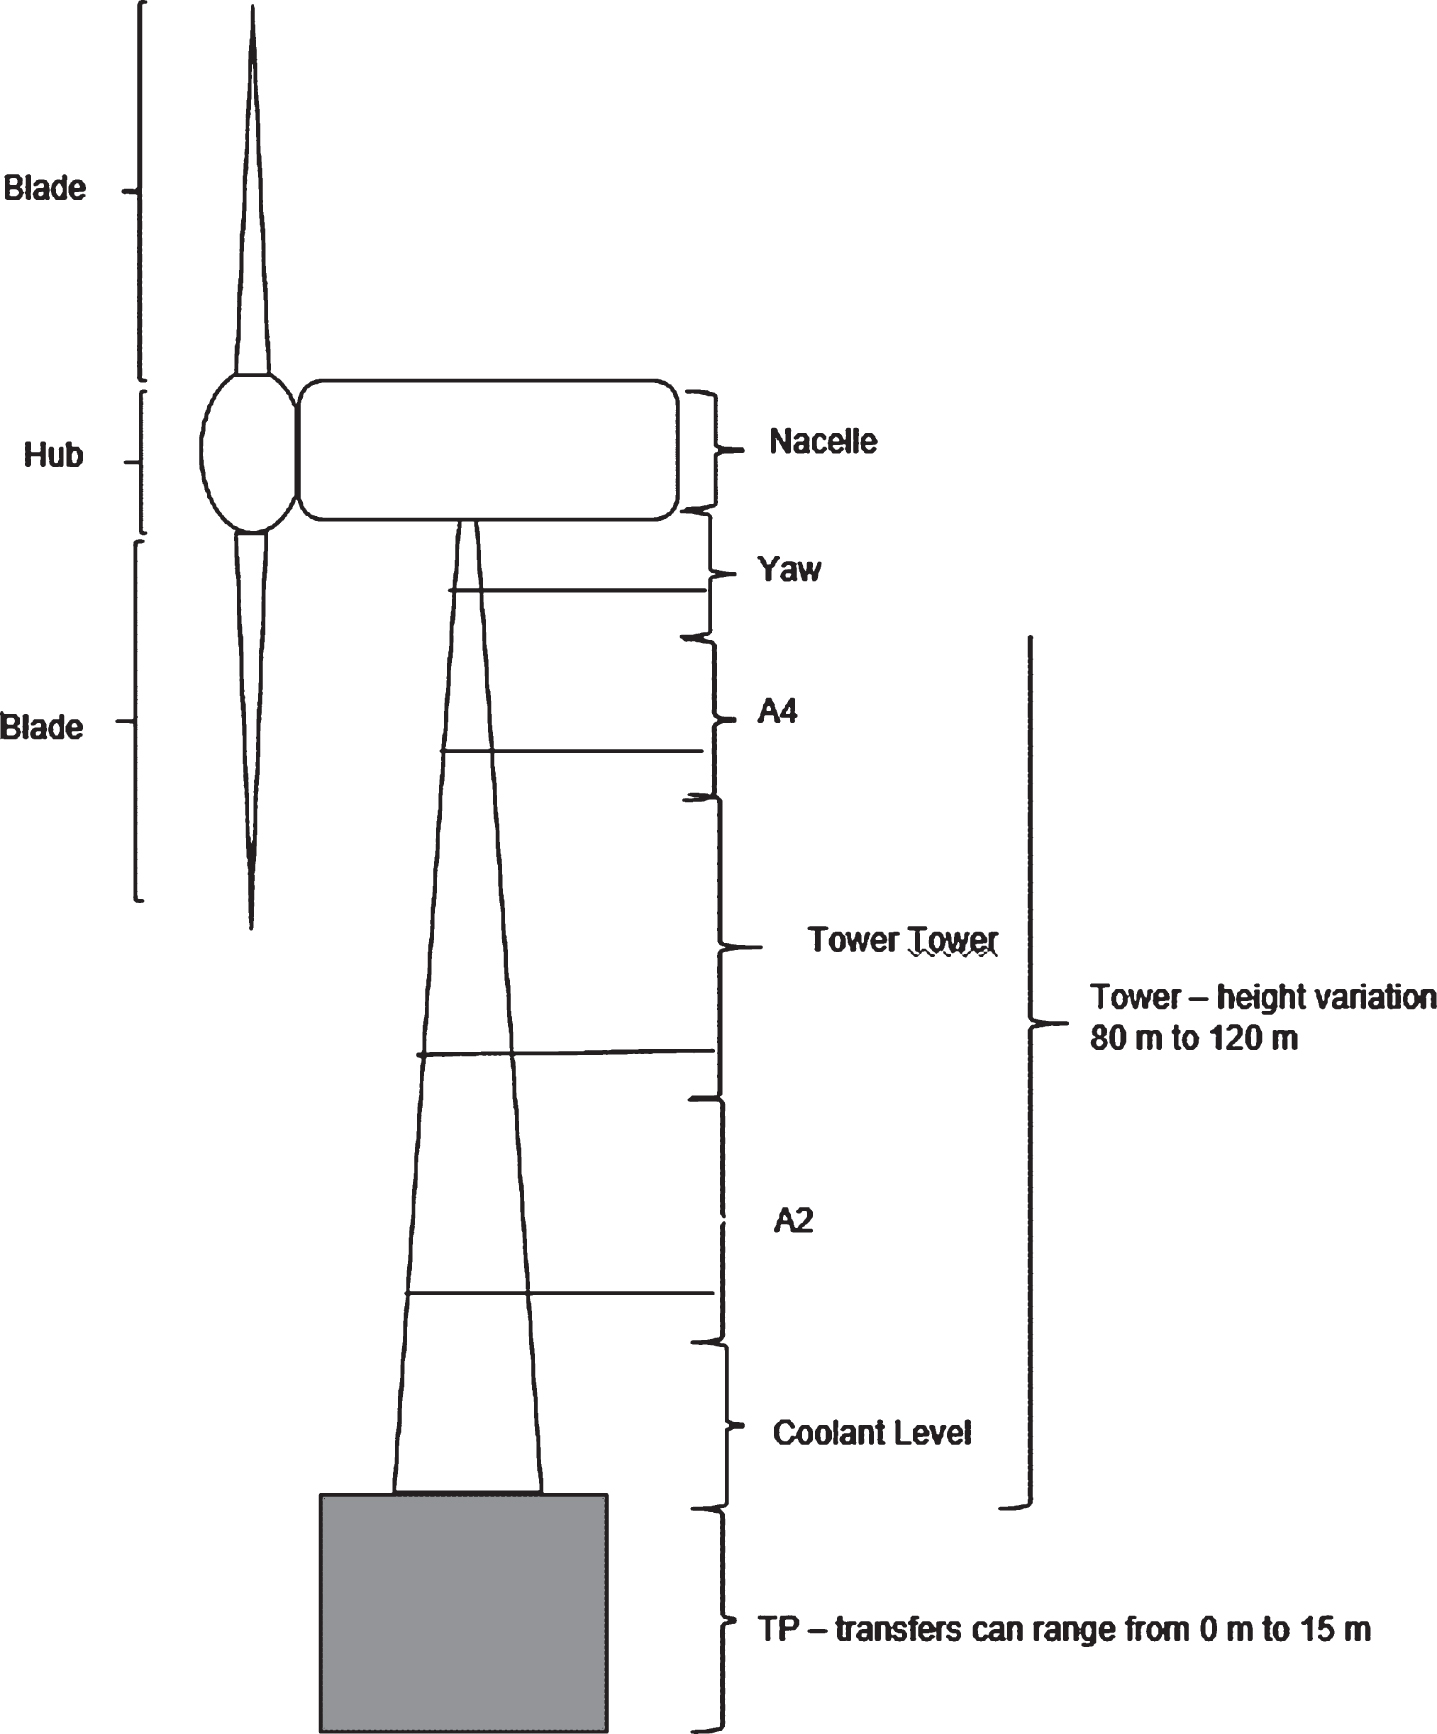 Schematic of an offshore wind turbine. The schematic is not to scale with variations occurring in all aspects across the industry. The model is based on a 3.6 Offshore Turbine.